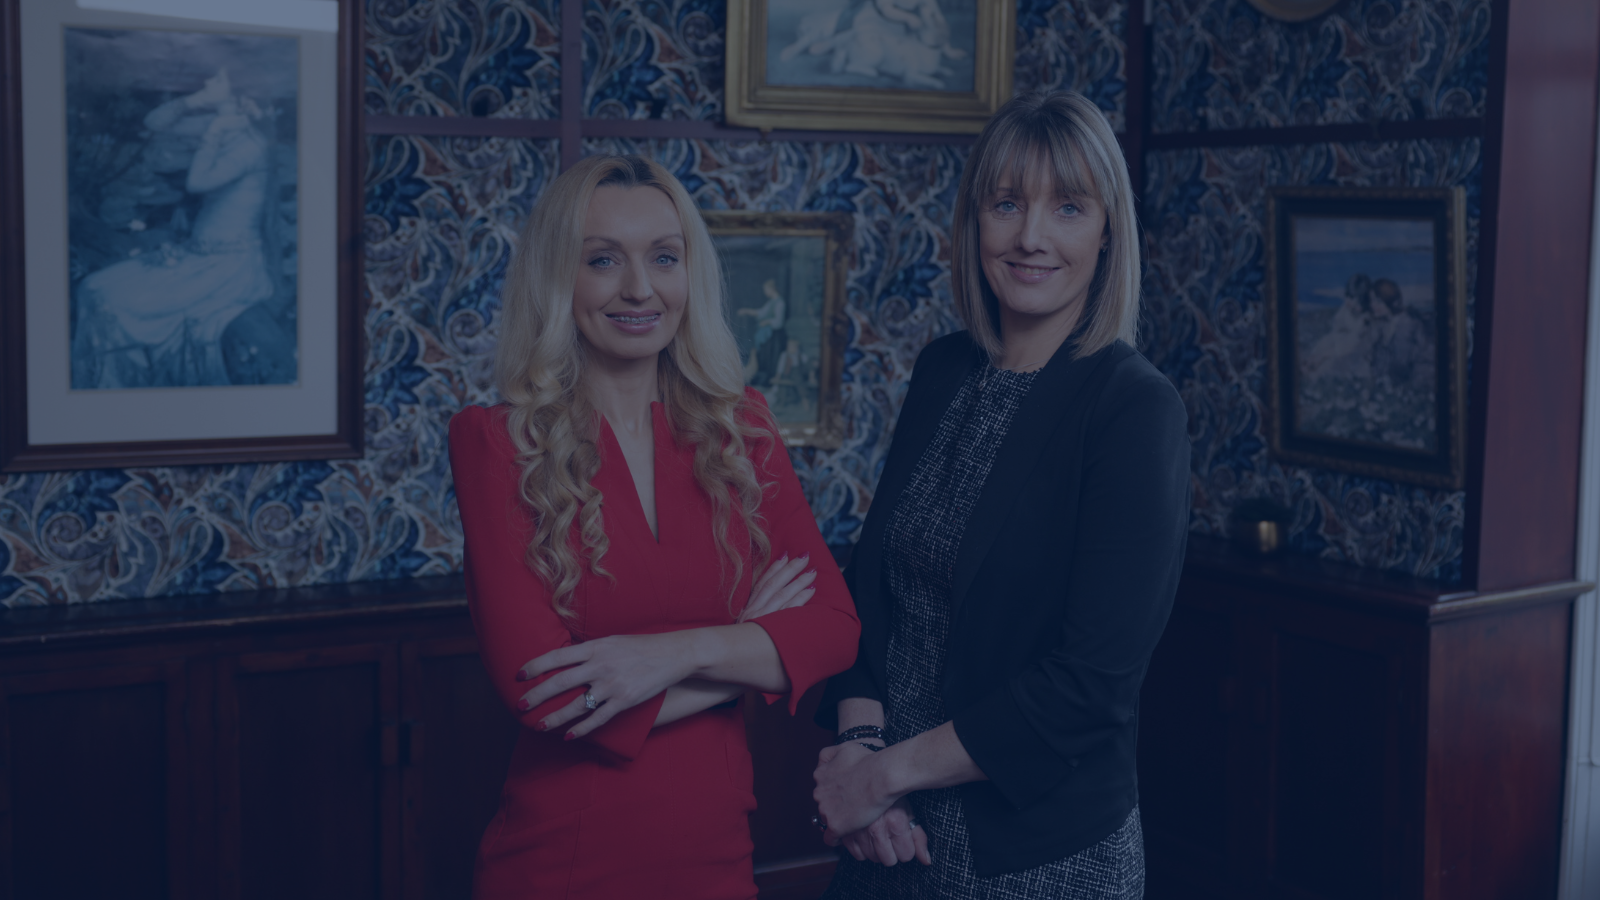 Mills Selig's current trainee Solicitors 